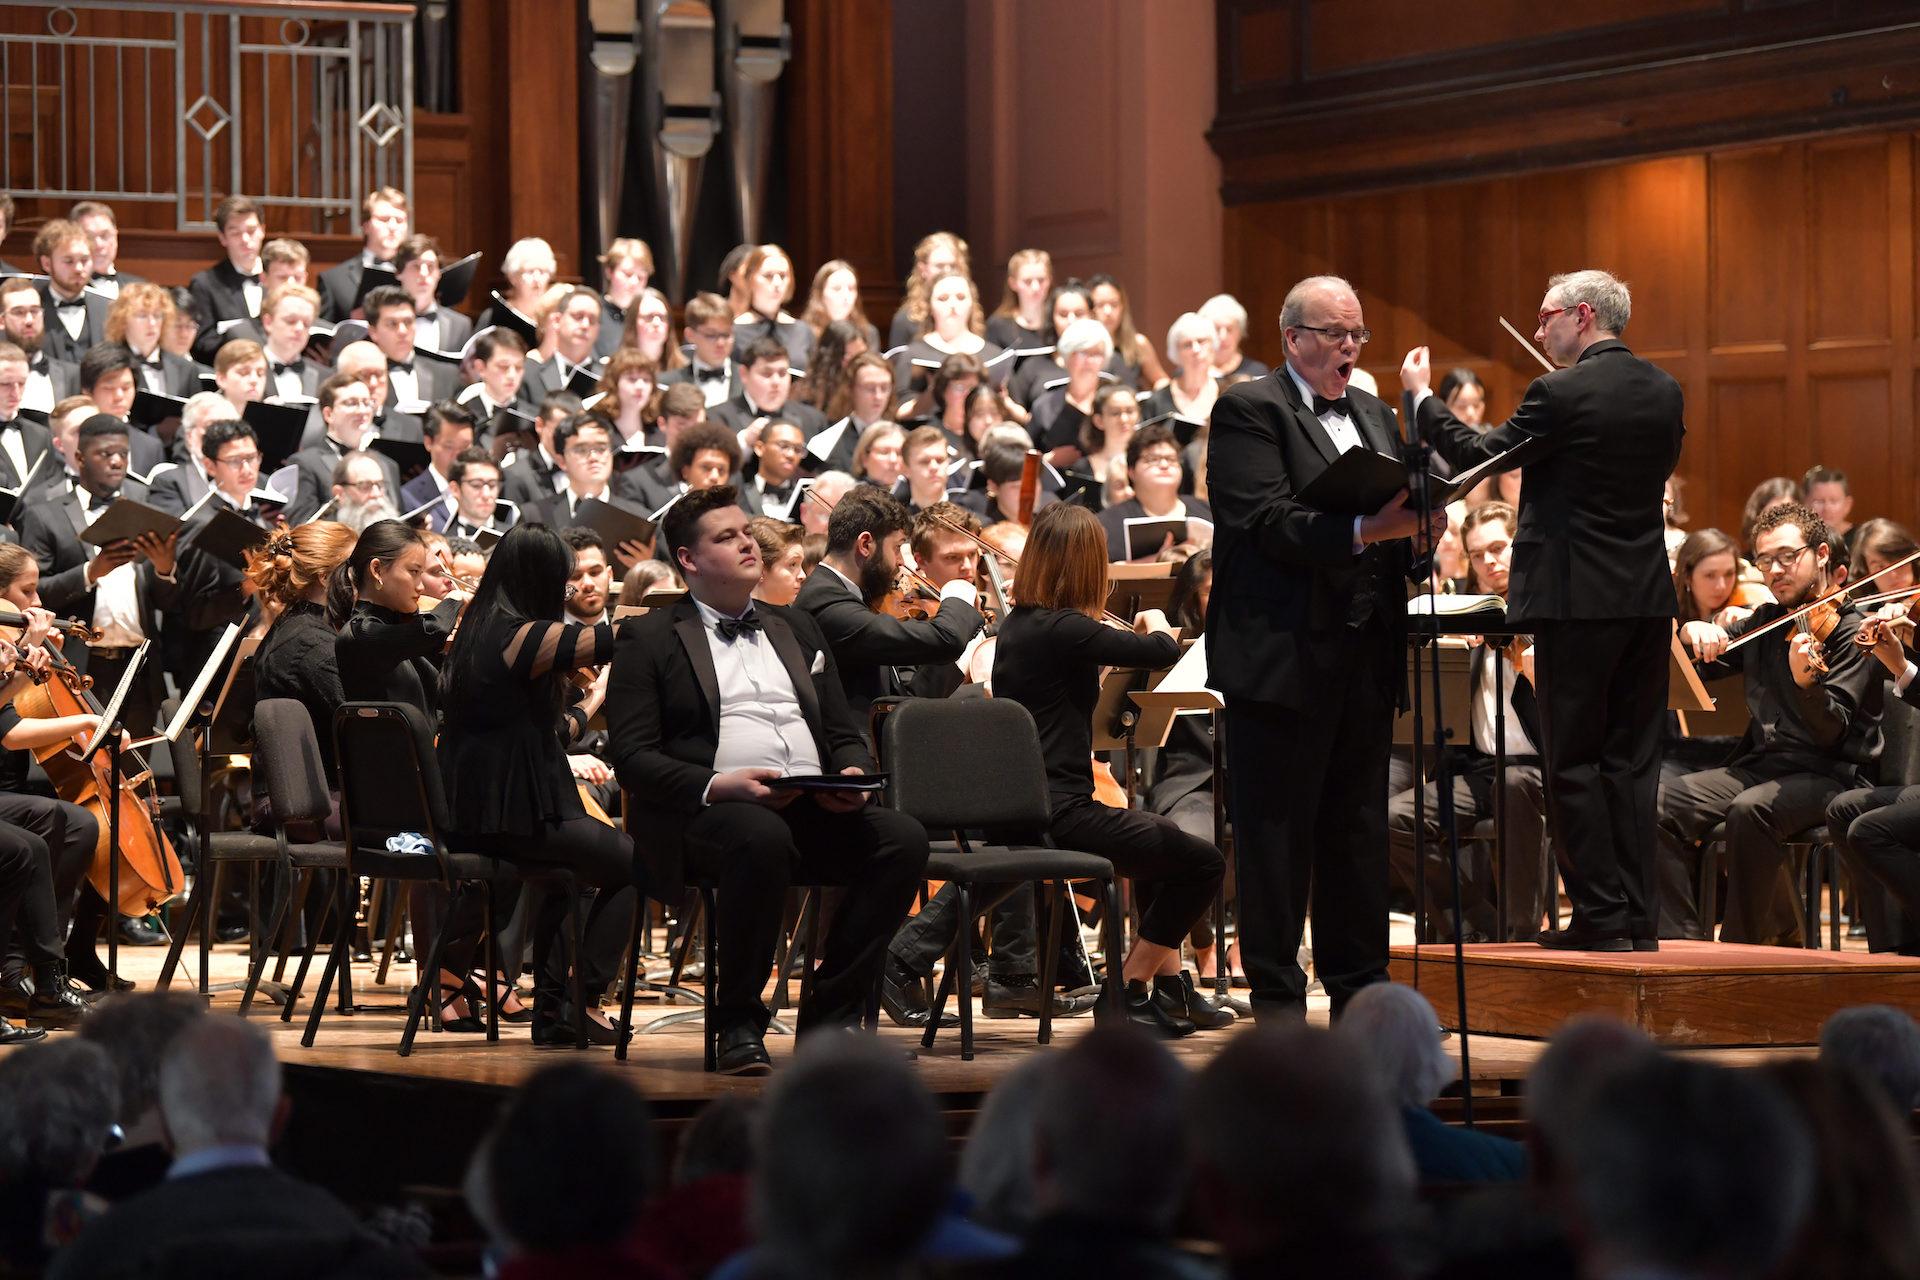 Handel's Messiah at Oberlin College & Conservatory